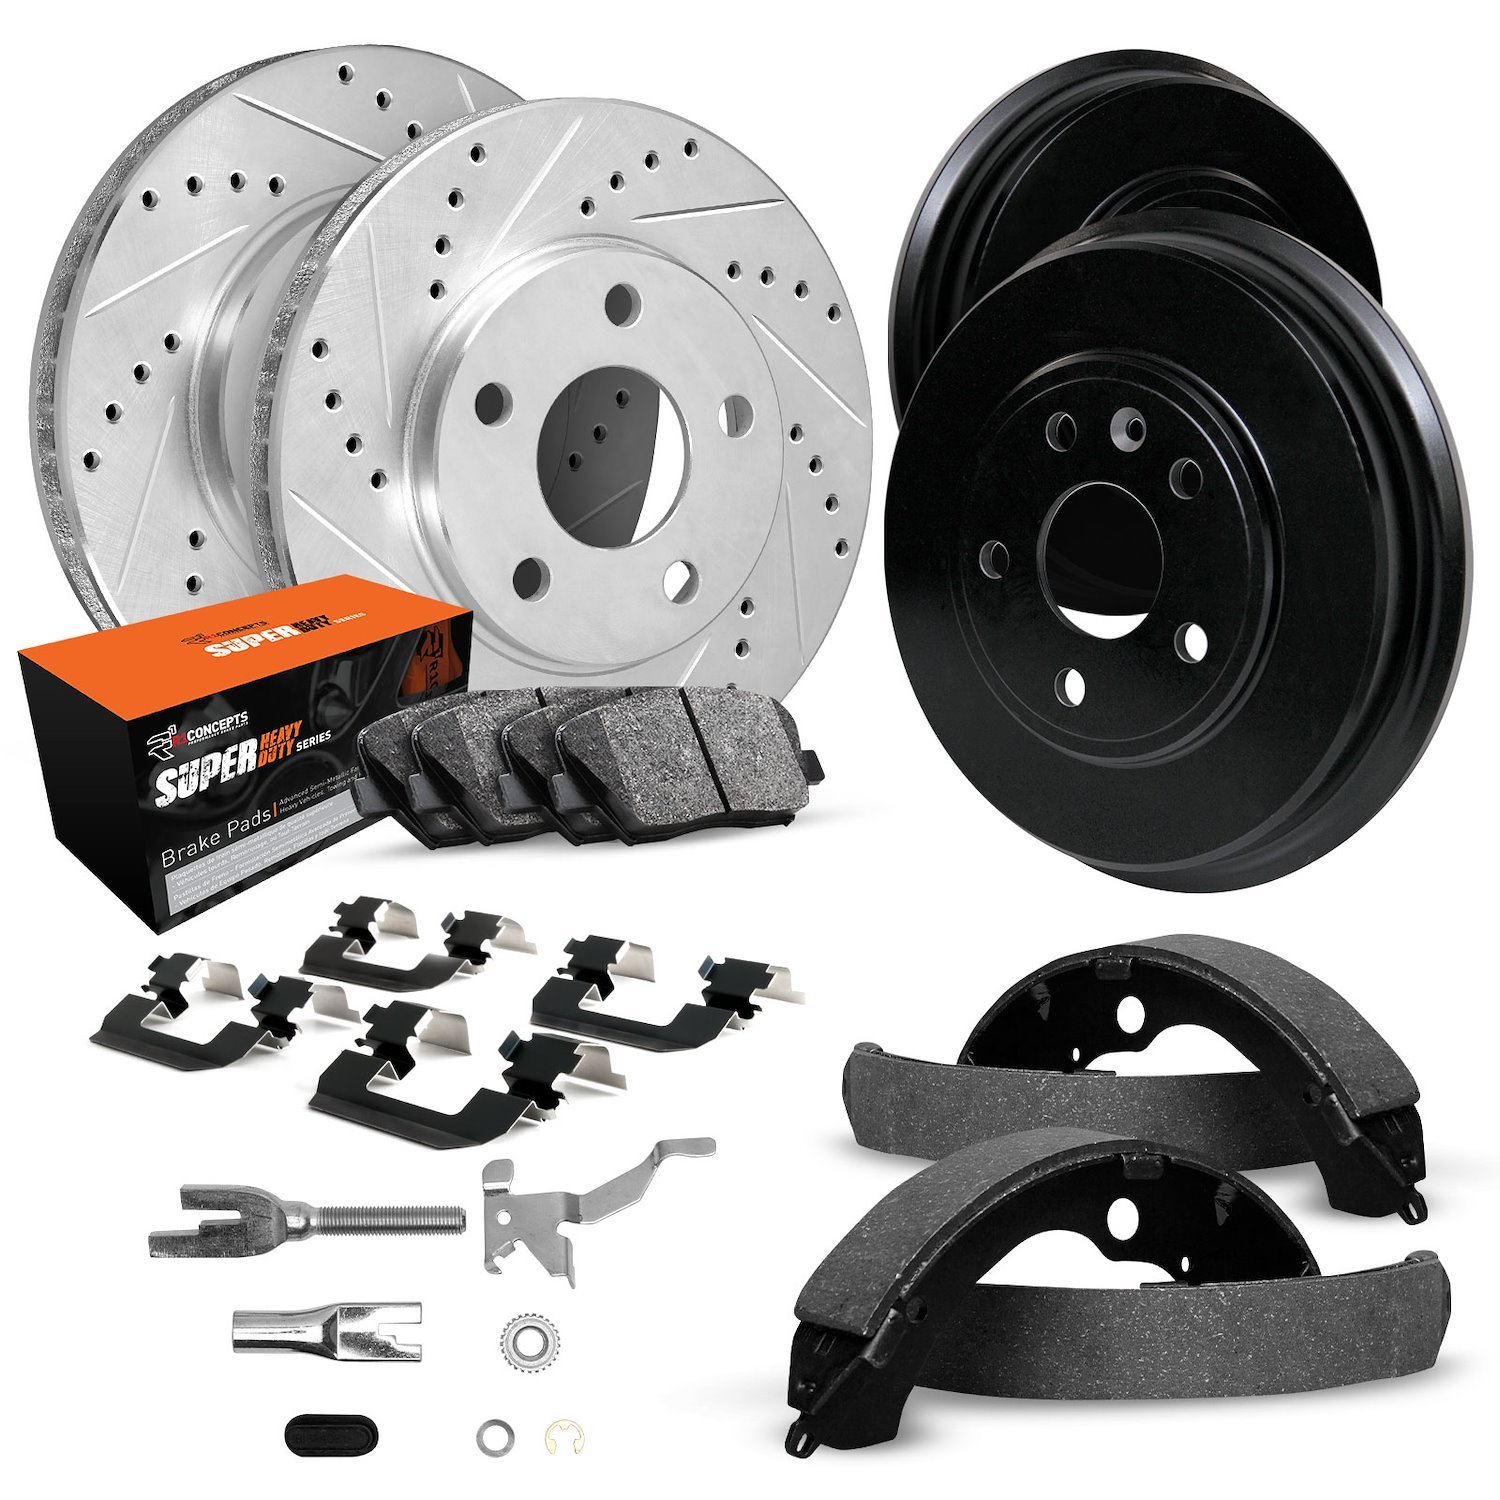 E-Line Drilled/Slotted Silver Rotor & Drum Set w/Super-Duty Pads, Shoes/Hardware/Adjusters, 1982-1984 Mopar